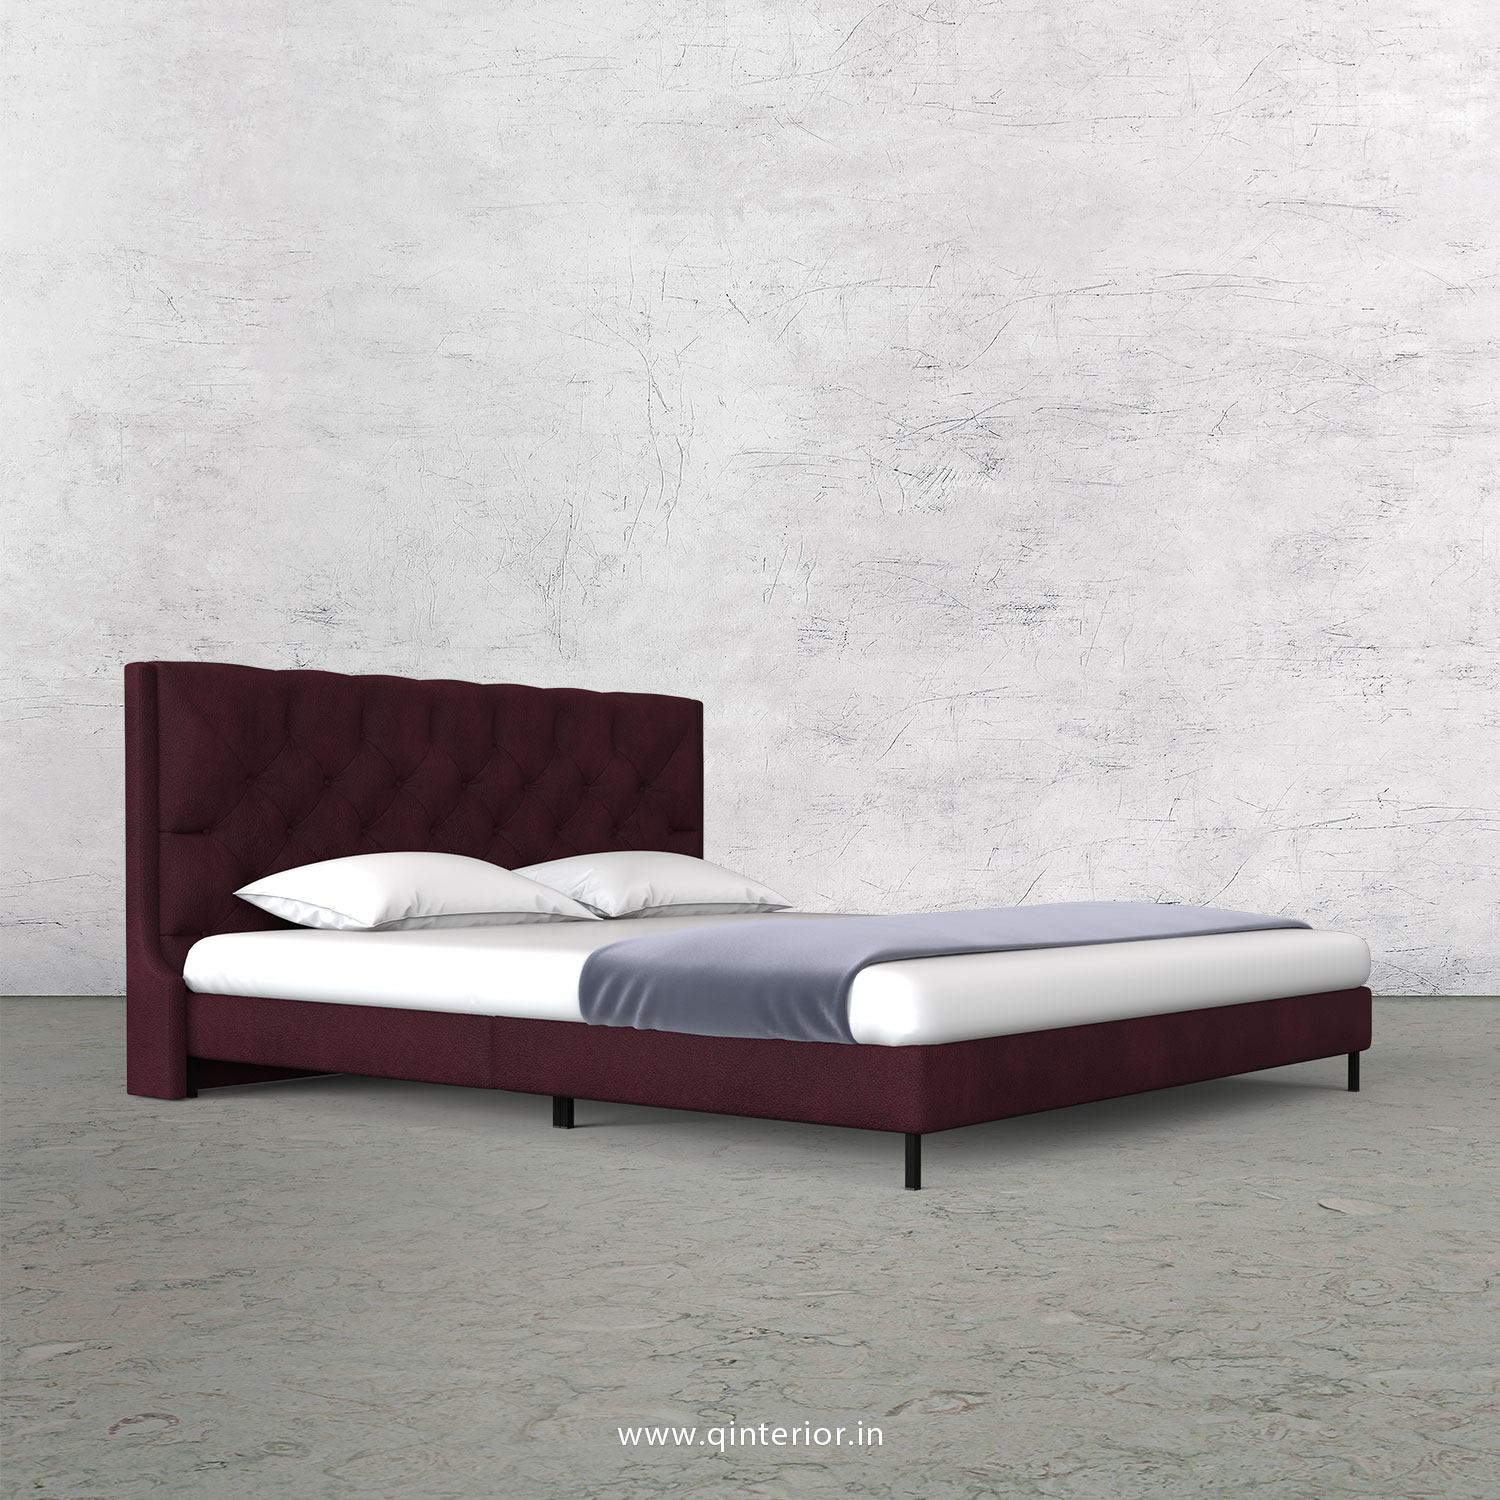 Scorpius Queen Size Bed with Fab Leather Fabric - QBD003 FL12